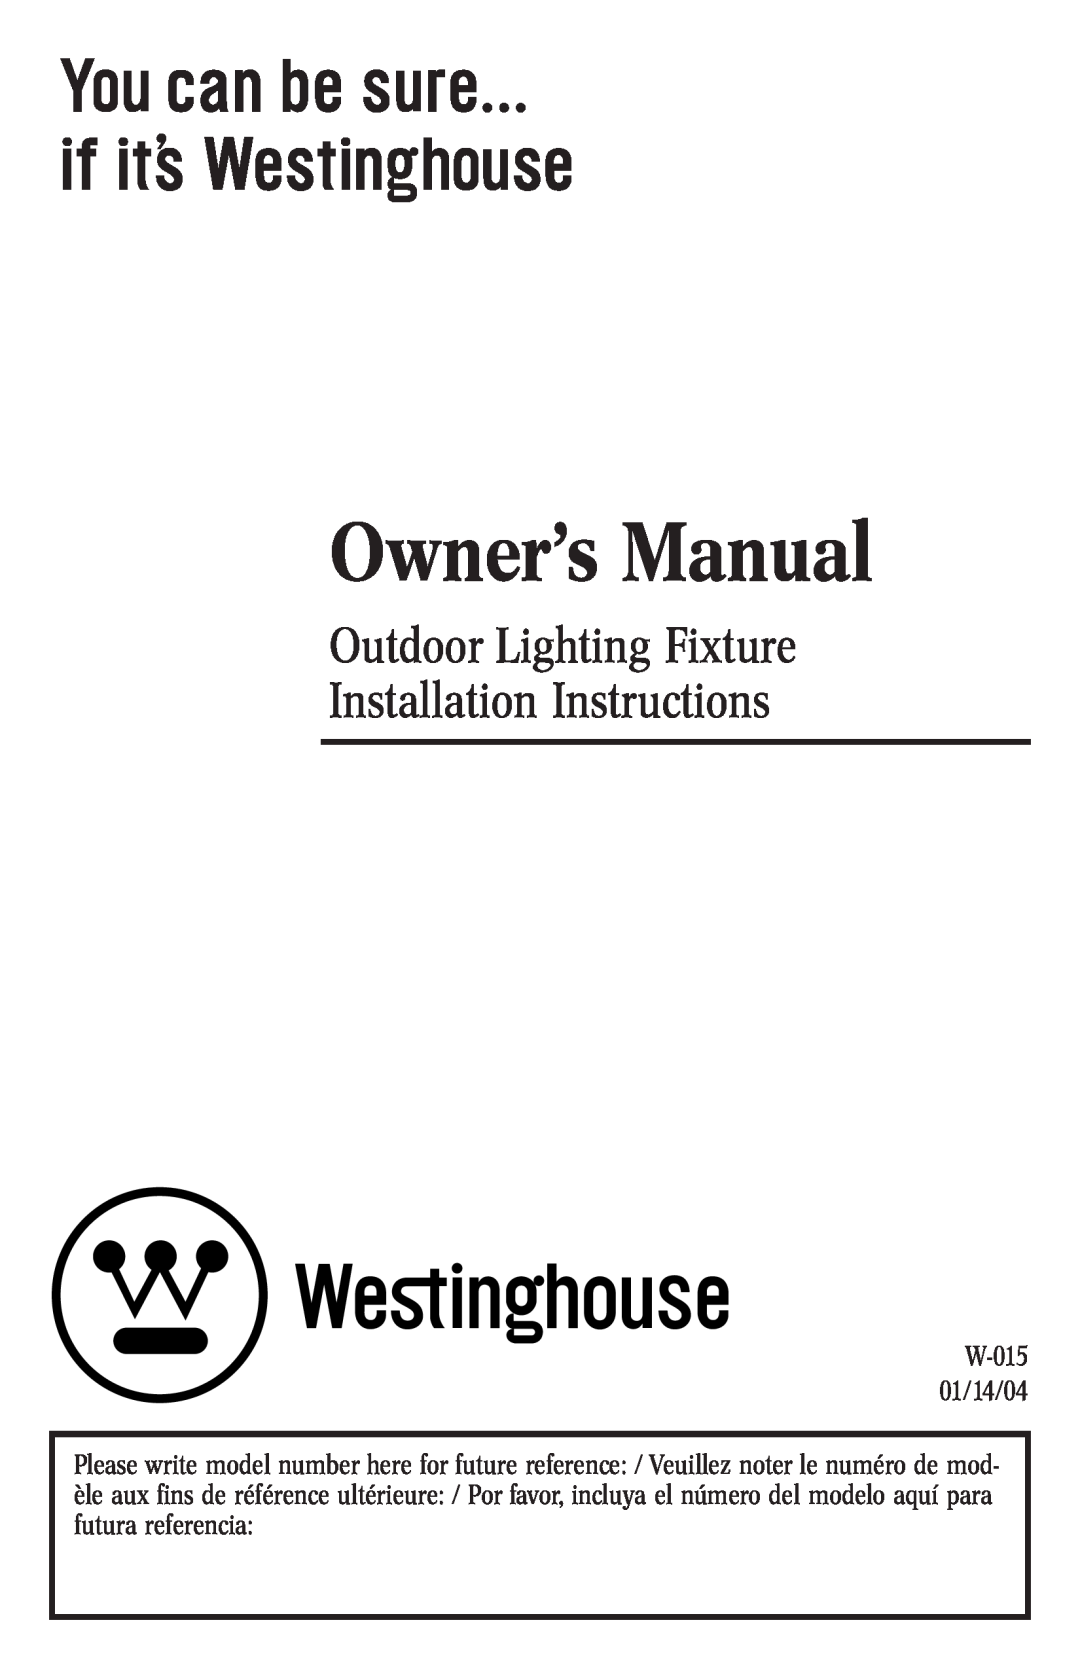 Westinghouse W-015 owner manual Outdoor Lighting Fixture, Installation Instructions 